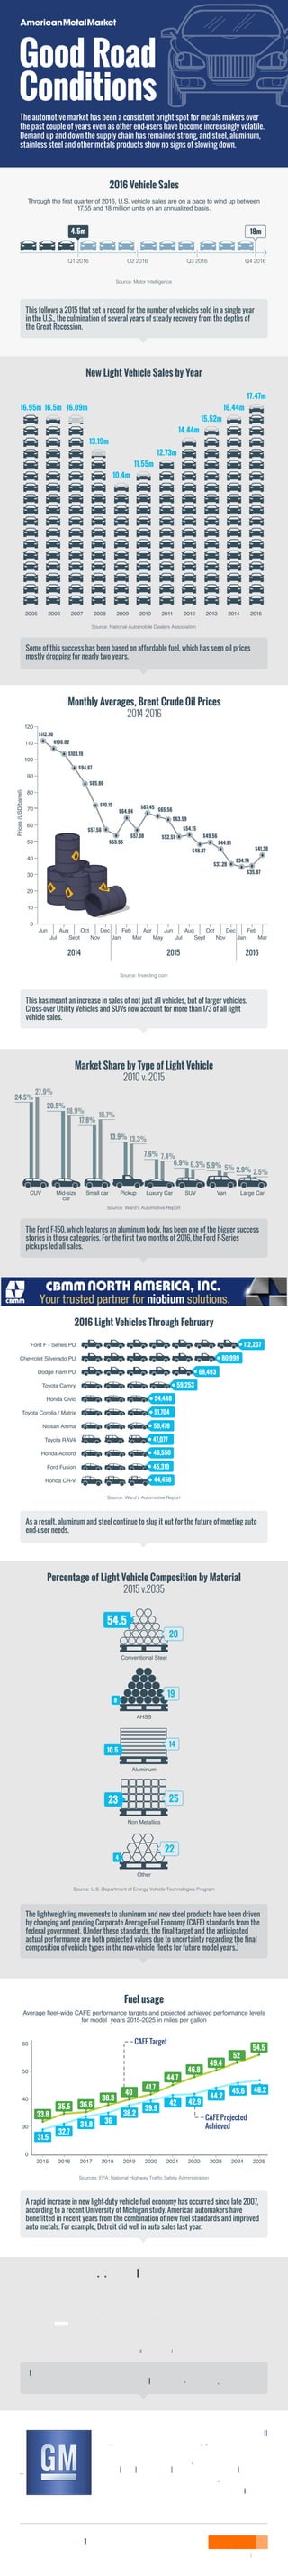 5.9% 5% 2.9% 2.5%
2016 Vehicle Sales
The automotive market has been a consistent bright spot for metals makers over
the past couple of years even as other end-users have become increasingly volatile.
Demand up and down the supply chain has remained strong, and steel, aluminum,
stainless steel and other metals products show no signs of slowing down.
This follows a 2015 that set a record for the number of vehicles sold in a single year
in the U.S., the culmination of several years of steady recovery from the depths of
the Great Recession.
Through the first quarter of 2016, U.S. vehicle sales are on a pace to wind up between
17.55 and 18 million units on an annualized basis.
Source: Motor Intelligence
Source: National Automobile Dealers Association
Source: Investing.com
Source: Ward's Automotive Report
Source: Ward's Automotive Report
Market Share by Type of Light Vehicle
2010 v. 2015
CUV Pickup Luxury Car SUV Van Large CarSmall carMid-size
car
2016 Light Vehicles Through February
Percentage of Light Vehicle Composition by Material
2015 v.2035
Source: U.S. Department of Energy Vehicle Technologies Program
Conventional Steel
AHSS
Aluminum
Non Metallics
Other
Fuel usage
Average fleet-wide CAFE performance targets and projected achieved performance levels
for model years 2015-2025 in miles per gallon
Sources: EPA; National Highway Traffic Safety Administration
Source: Wall Street Journal
Top U.S. Auto sales by manufacturer
“The bears argue that the industry has peaked and is ready to roll
over. They often cite the fact that the U.S. auto industry is in its
seventh year of expansion, margins are as good as they get, and a
recession is right around the corner. On the other hand, a number
of people, including GM, believe that the industry is plateauing,
with many years of strong performance ahead.”
Chuck Stevens, GM executive vice president and chief financial officer
Source: AMM
©GeneralMotors
Good Road
Conditions
2015 2016 2017 2018 2019 2020 2021 2022 2023 2024 2025
60
50
40
30
0
33.8
31.5
32.7
34.8
36
38.2
39.9
42
44.2
45.6 46.2
35.5 36.6
38.3
40
41.7
44.7
46.8
49.4
52
54.5
CAFE Target
CAFE Projected
Achieved
42.9
Q1 2016 Q2 2016 Q3 2016 Q4 2016
4.5m 18m
As a result, aluminum and steel continue to slug it out for the future of meeting auto
end-user needs.
Although the CAFE standards may change over time, the strength of the automotive
market is not expected to change significantly in the near-term future.
The lightweighting movements to aluminum and new steel products have been driven
by changing and pending Corporate Average Fuel Economy (CAFE) standards from the
federal government. (Under these standards, the final target and the anticipated
actual performance are both projected values due to uncertainty regarding the final
composition of vehicle types in the new-vehicle fleets for future model years.)
A rapid increase in new light-duty vehicle fuel economy has occurred since late 2007,
according to a recent University of Michigan study. American automakers have
benefitted in recent years from the combination of new fuel standards and improved
auto metals. For example, Detroit did well in auto sales last year.
This has meant an increase in sales of not just all vehicles, but of larger vehicles.
Cross-over Utility Vehicles and SUVs now account for more than 1/3 of all light
vehicle sales.
The Ford F-150, which features an aluminum body, has been one of the bigger success
stories in those categories. For the first two months of 2016, the Ford F-Series
pickups led all sales.
54.5
20
2523
19
8
14
10.5
22
4
17.6%
14.9% 14.3% 12.8%
New Light Vehicle Sales by Year
2005 2006 2007 2008 2009 2010 2011 2012 2013 2014 2015
Some of this success has been based on affordable fuel, which has seen oil prices
mostly dropping for nearly two years.
16.95m 16.5m 16.09m
13.19m
10.4m
11.55m
12.73m
14.44m
15.52m
16.44m
17.47m
120
110
100
90
80
70
60
50
40
30
20
10
0
Monthly Averages, Brent Crude Oil Prices
2014-2016
$48.37
$49.56
$44.61
$37.28
$34.74
$35.97
$41.38
Prices(USD/barrel)
2014 20162015
Jun
Jul
Aug
Sept
Oct
Nov
Dec Jun
Jul
Aug
Sept
Oct
Nov
Dec
Jan
Feb
Mar Jan
Feb
Mar
Apr
May
$112.36
$103.19
$94.67
$85.86
$70.15
$57.56
$53.95
$64.84
$57.08
$67.45
$65.56
$63.59
$52.51
$54.15
$106.02
24.5%
27.9%
20.5%
18.9%
17.8%
18.7%
13.9% 13.3%
7.6% 7.4%
© 2016 American Metal Market
Subscribe >>
112,237
68,493
59,253
54,448
51,704
50,476
47,077
46,550
45,319
44,458
80,999
Ford F - Series PU
Chevrolet Silverado PU
Dodge Ram PU
Toyota Camry
Honda Civic
Toyota Corolla / Matrix
Nissan Altima
Toyota RAV4
Honda Accord
Ford Fusion
Honda CR-V
6.9% 6.3%
 